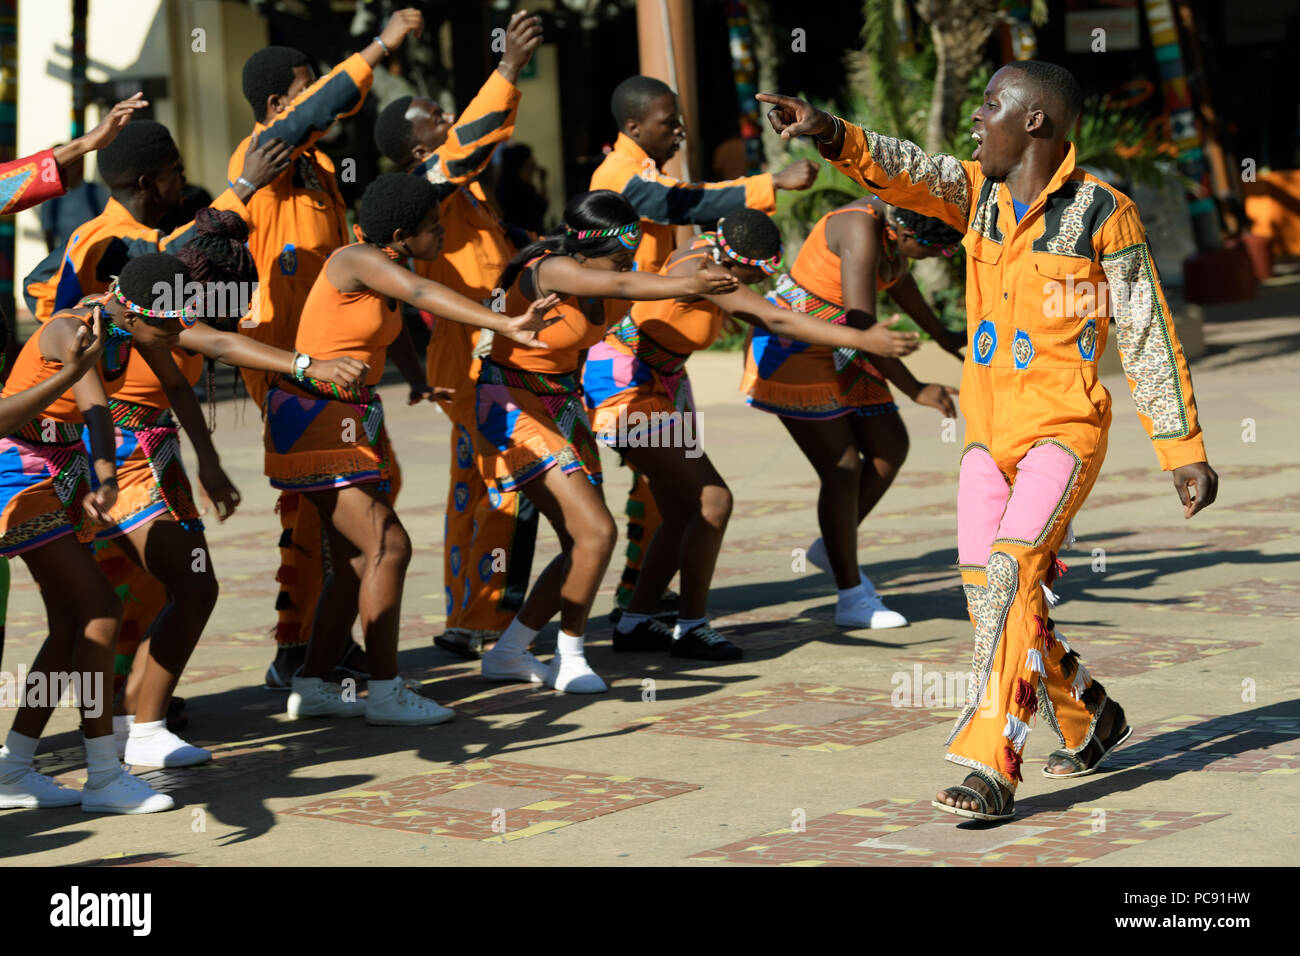 Young adult Zulu male leading cultural dance performers, Durban, South Africa Stock Photo